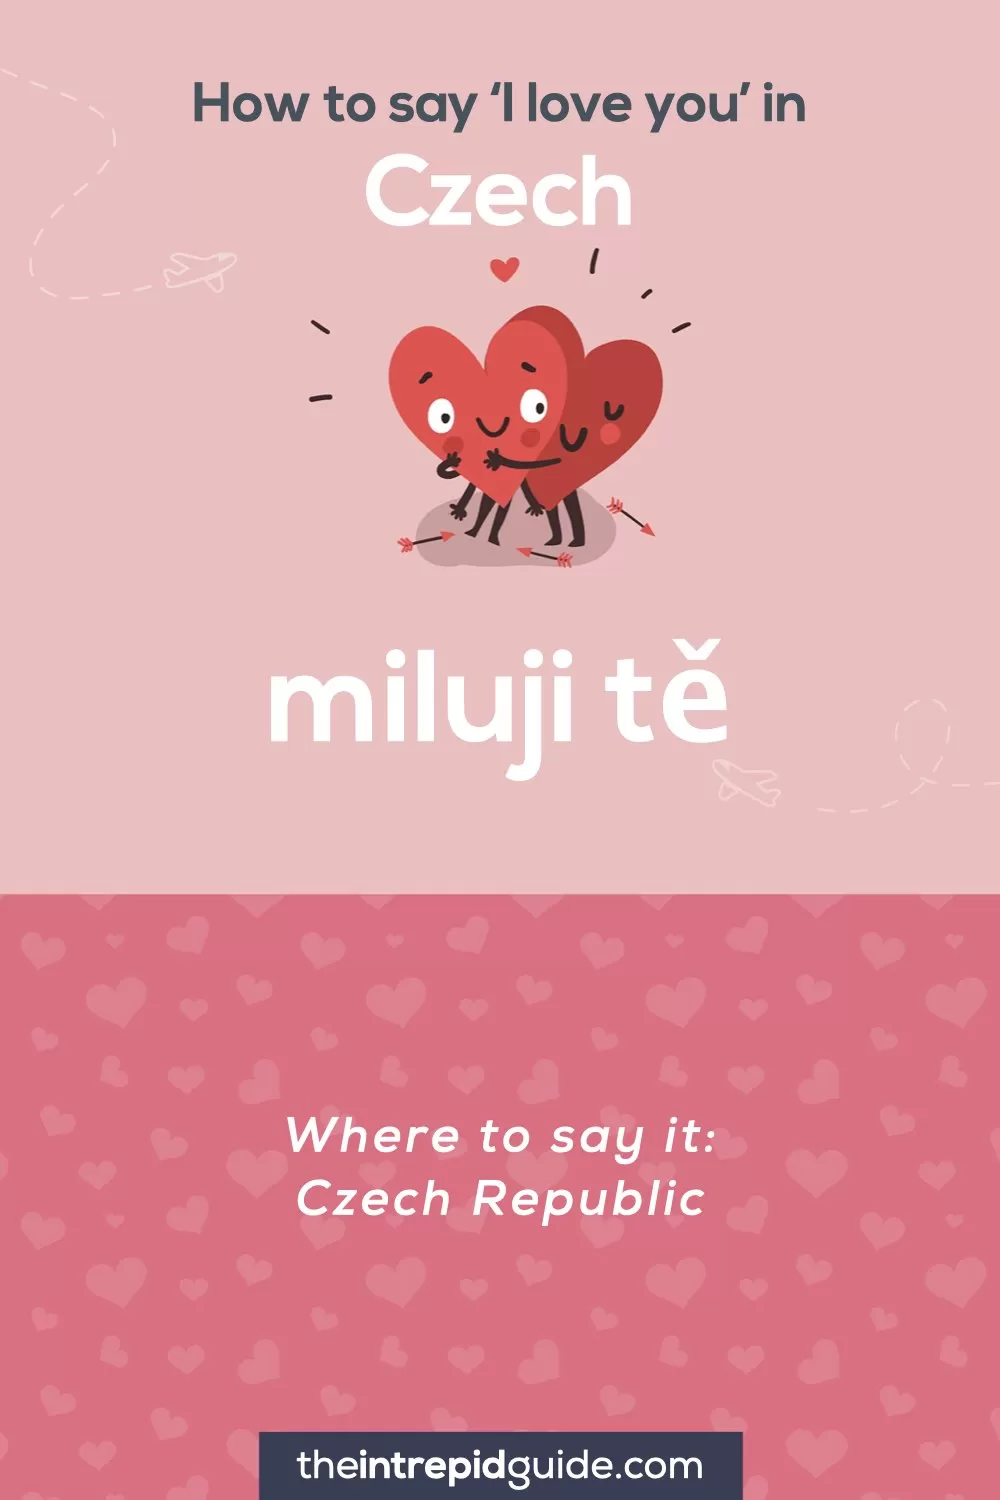 How to say I love you in different languages - Czech - miluji te